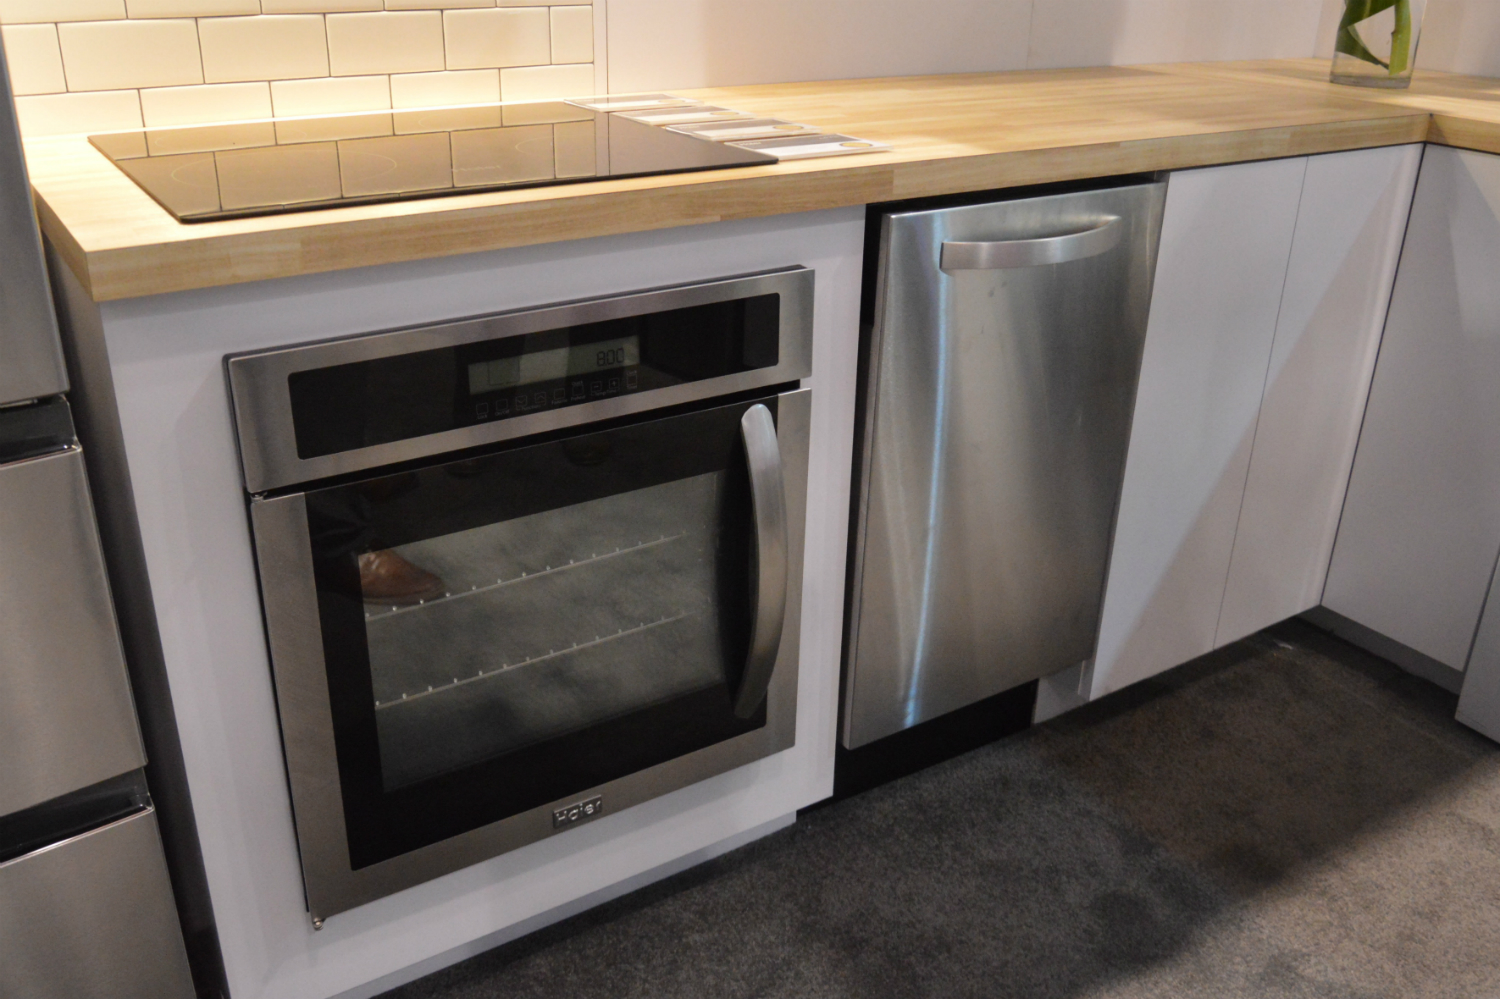 appliance trends kbis 2017 haier 24 inch oven handle on side